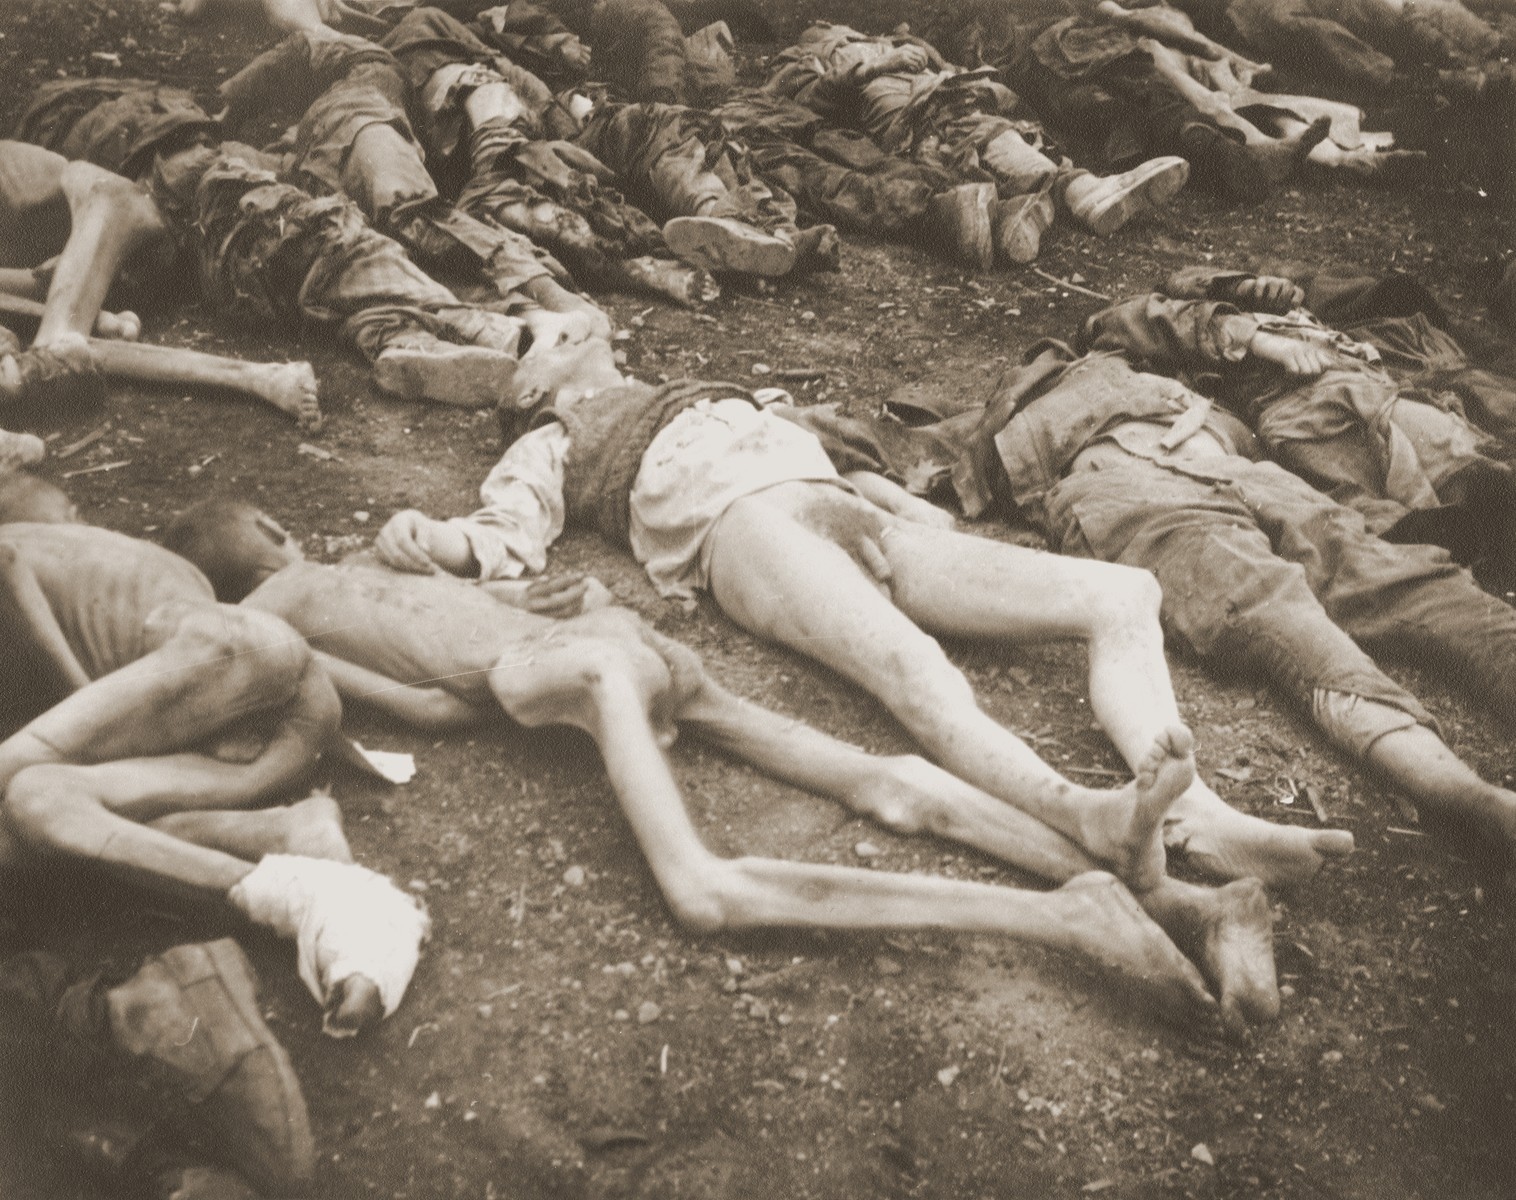 The bodies of prisoners killed in the Nordhausen concentration camp, which have been laid out in long rows outside the central barracks (Boelke Kaserne).